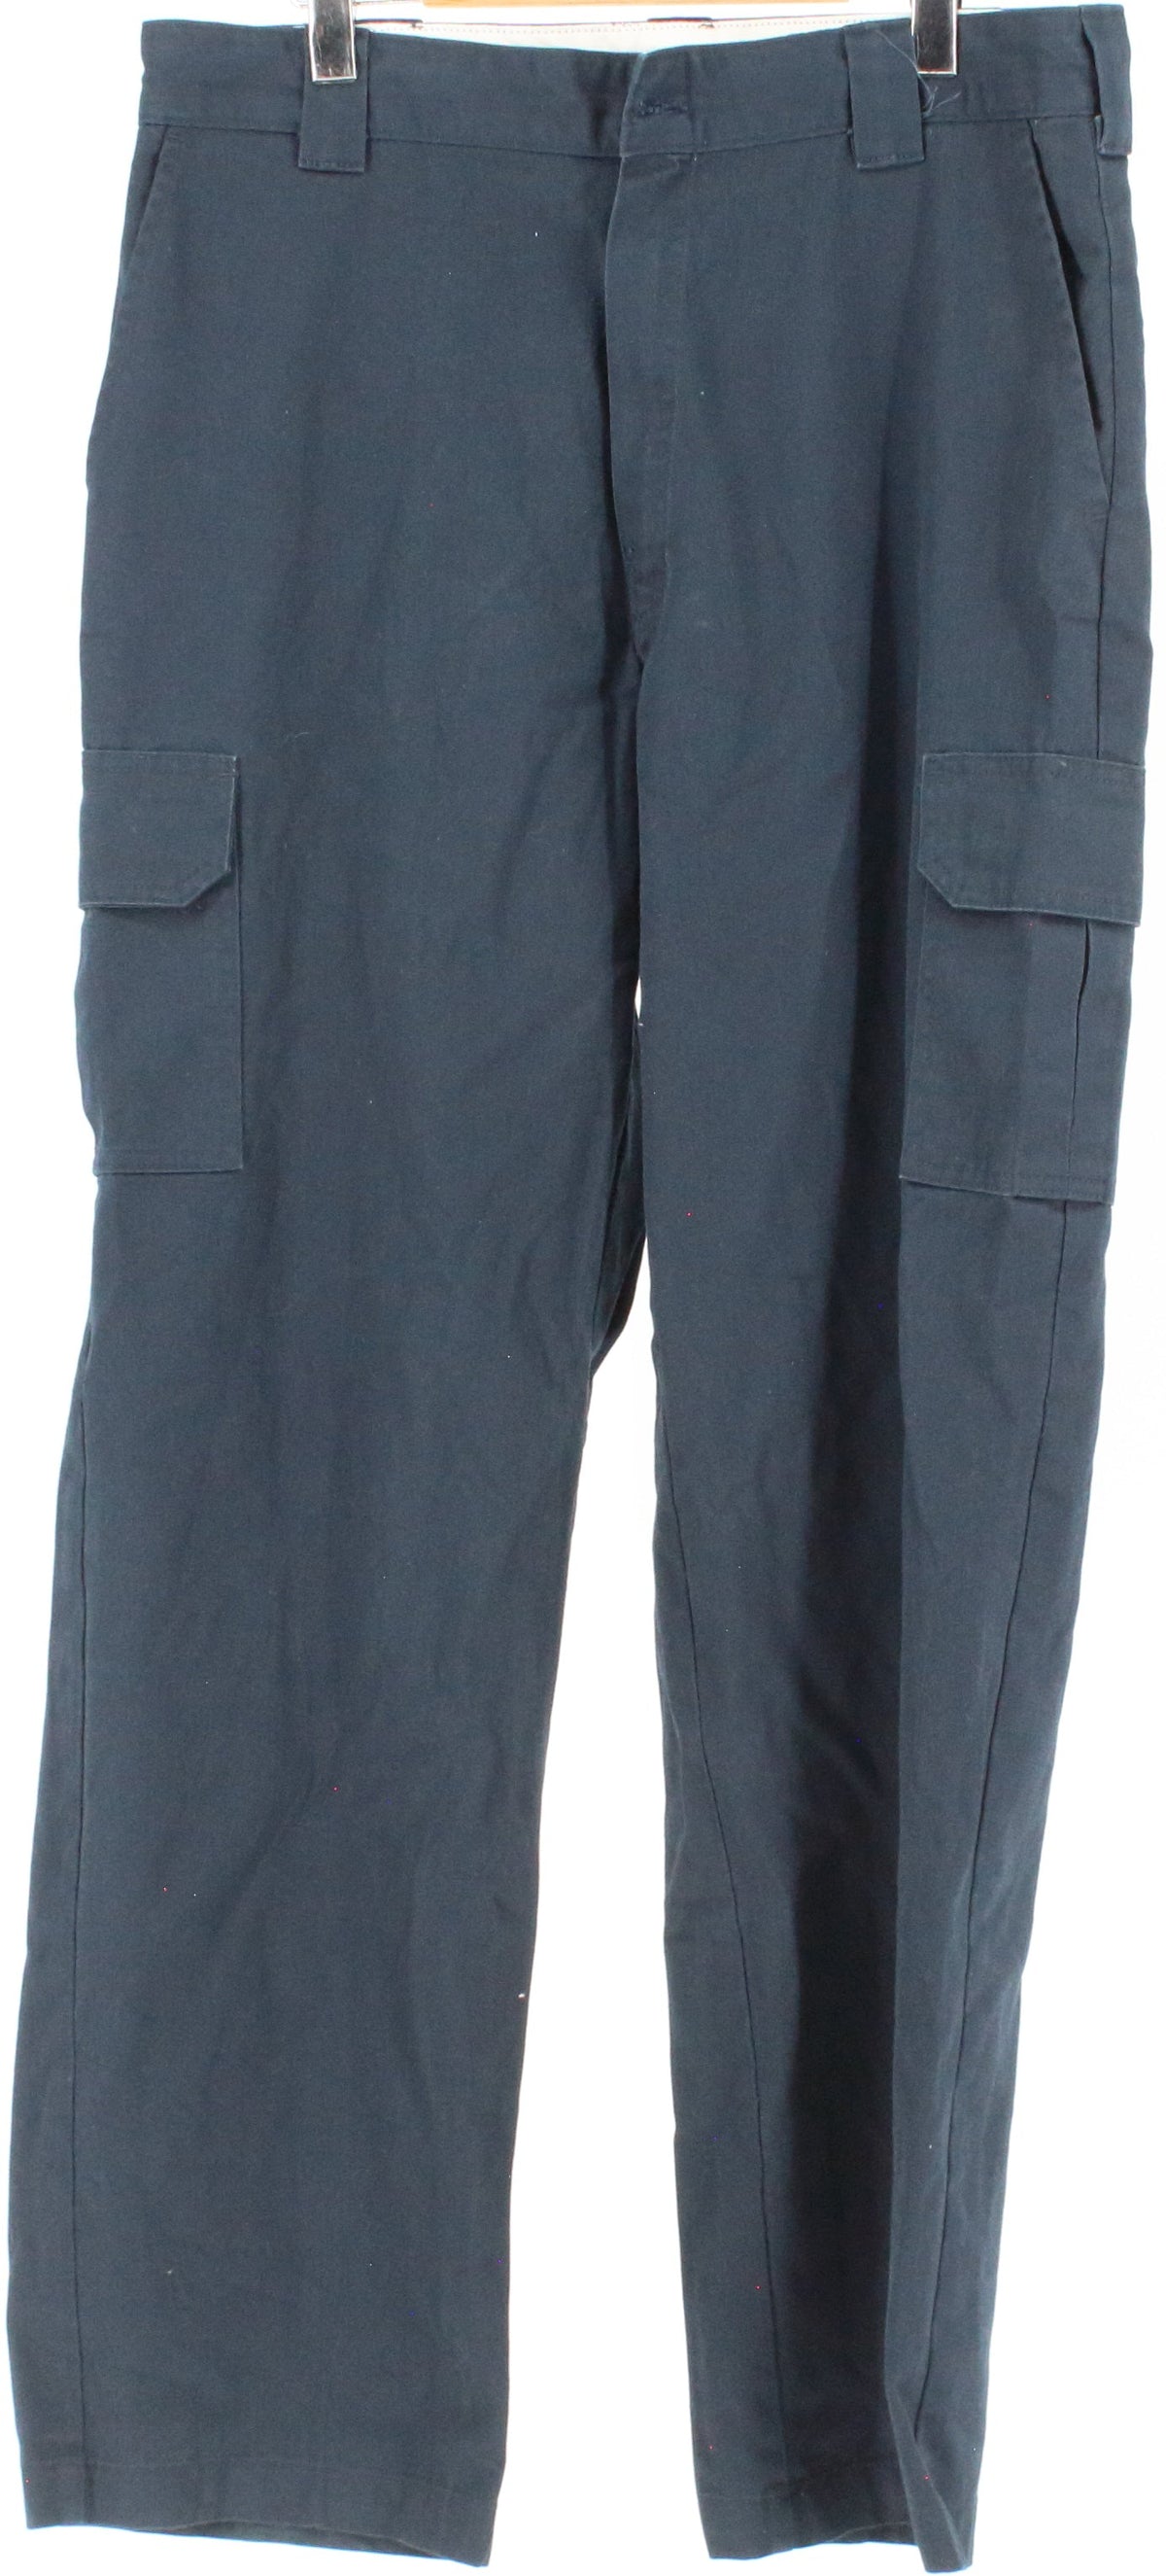 Dickies Relaxed Fit Navy Blue Cargo Pants